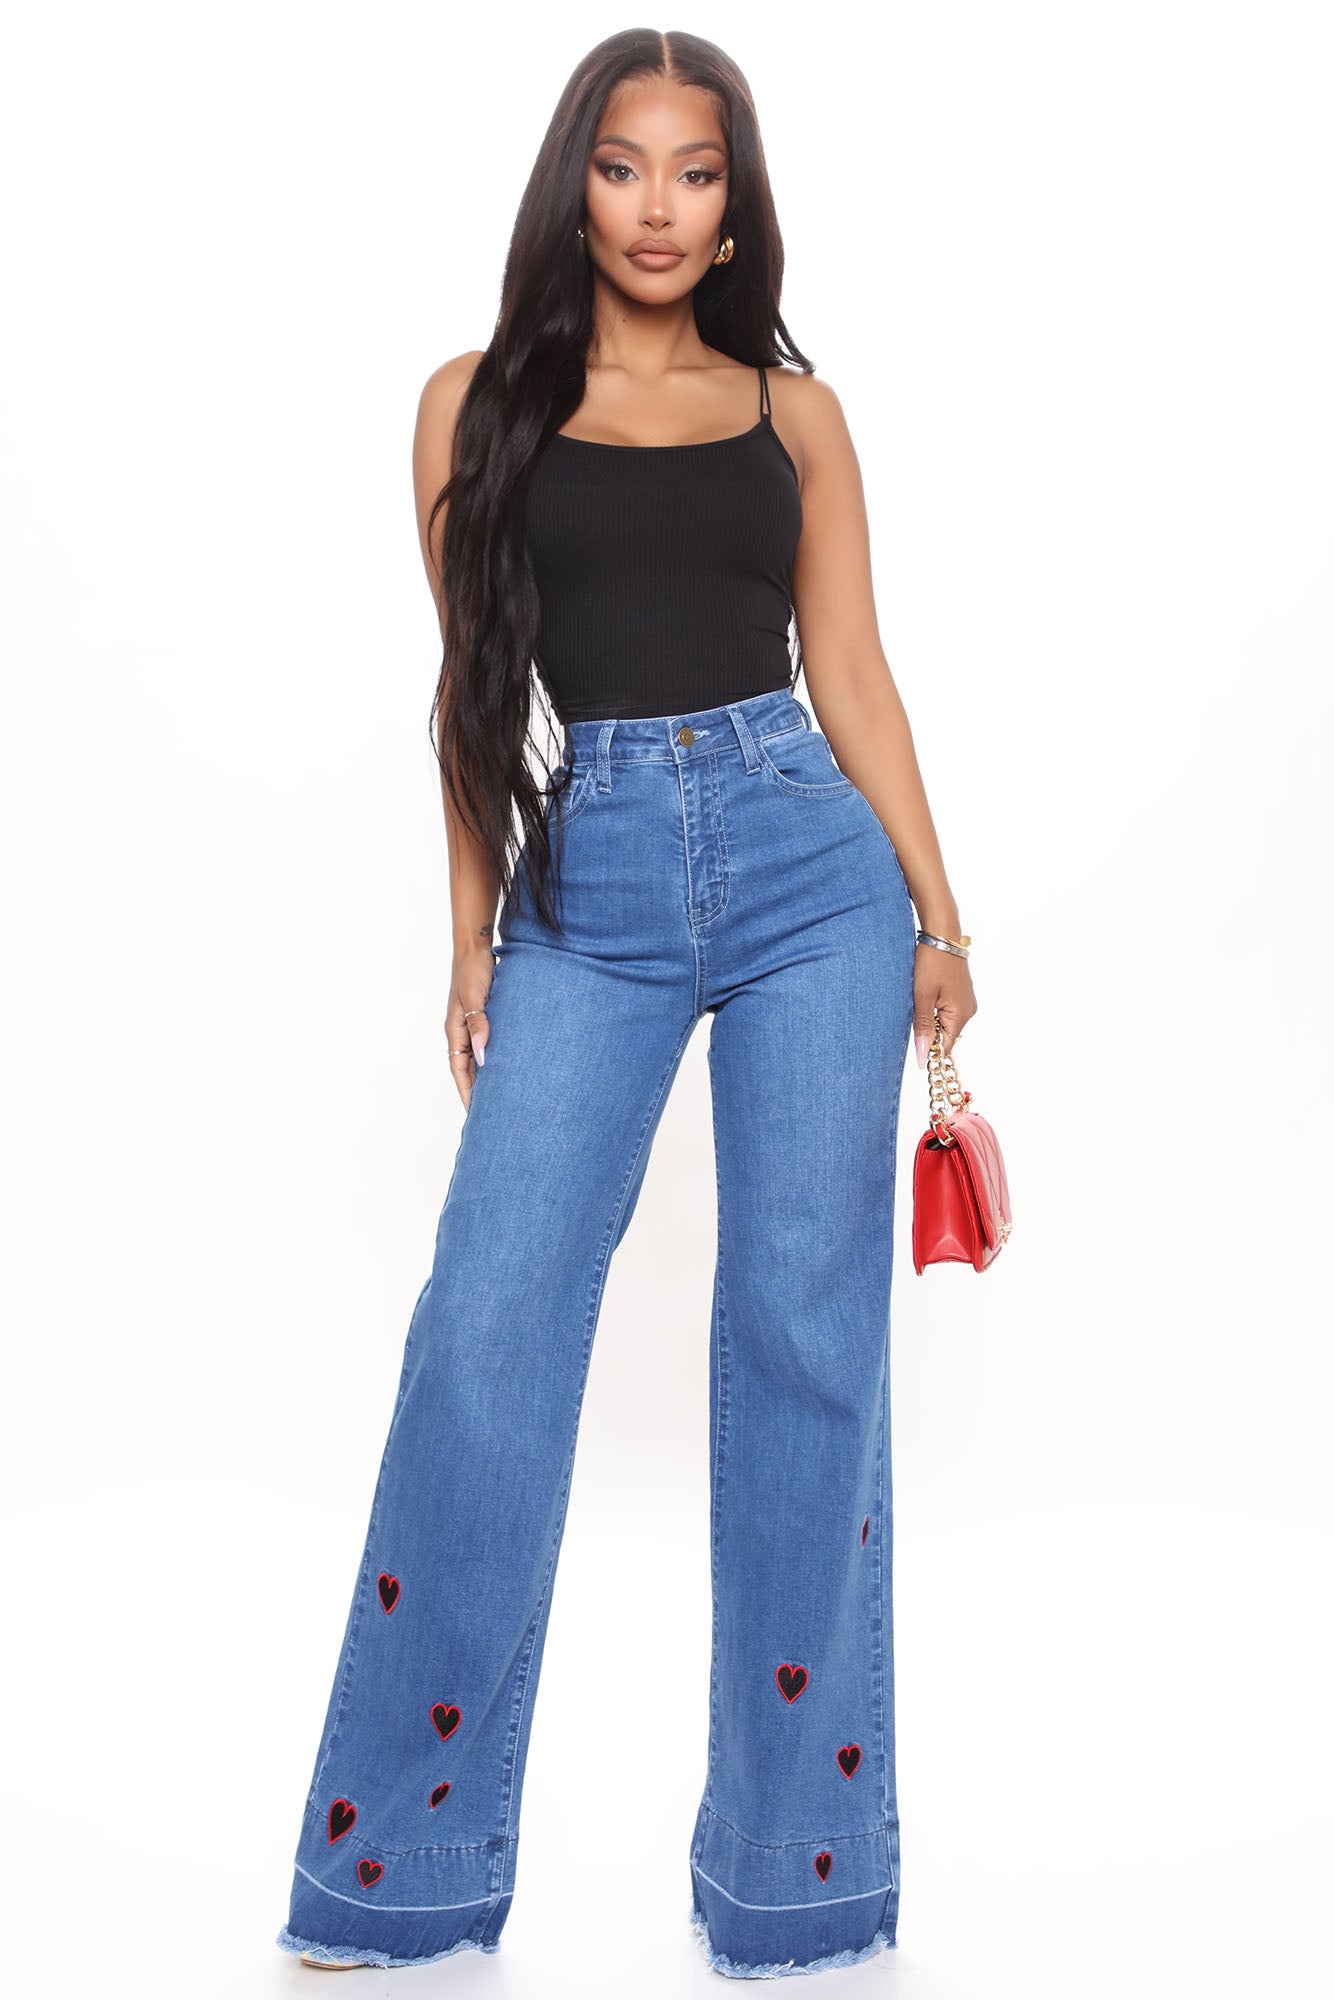 Fashion Nova - Our jeans get your booty poppin' 💕 Shop the Don't Break My  Heart Flare Jeans here 👉